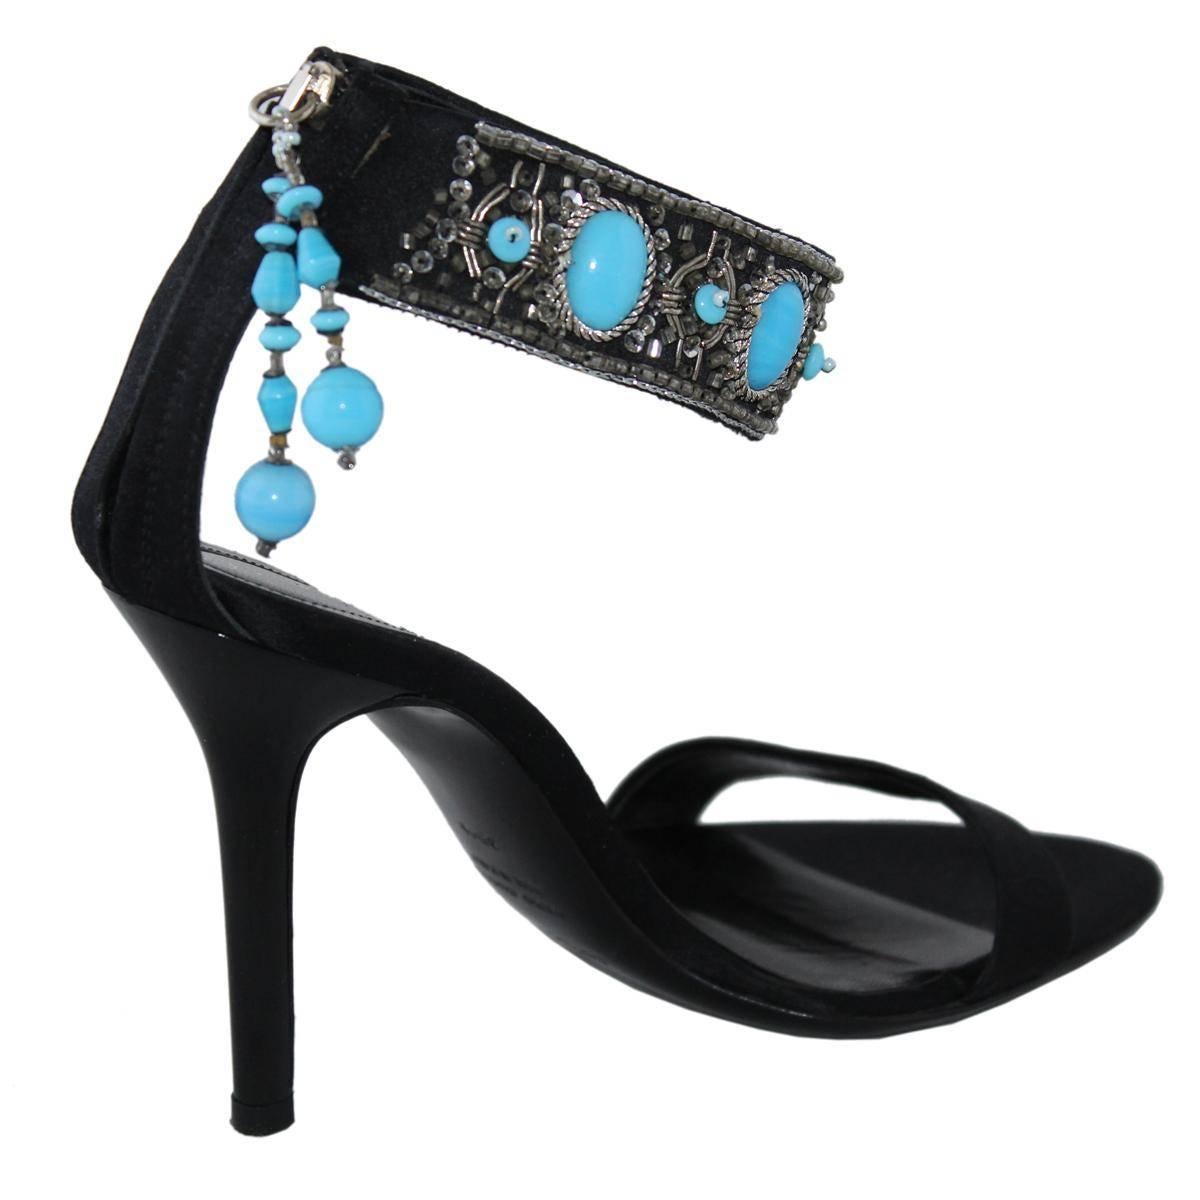 Beautiful pair of sandals by Sergio Rossi
Textile
Black color
Adorned with turquoise colored resins
Heel height cm 10 (3.93 inches)
Made in Italy
Worldwide express shipping included in the price !